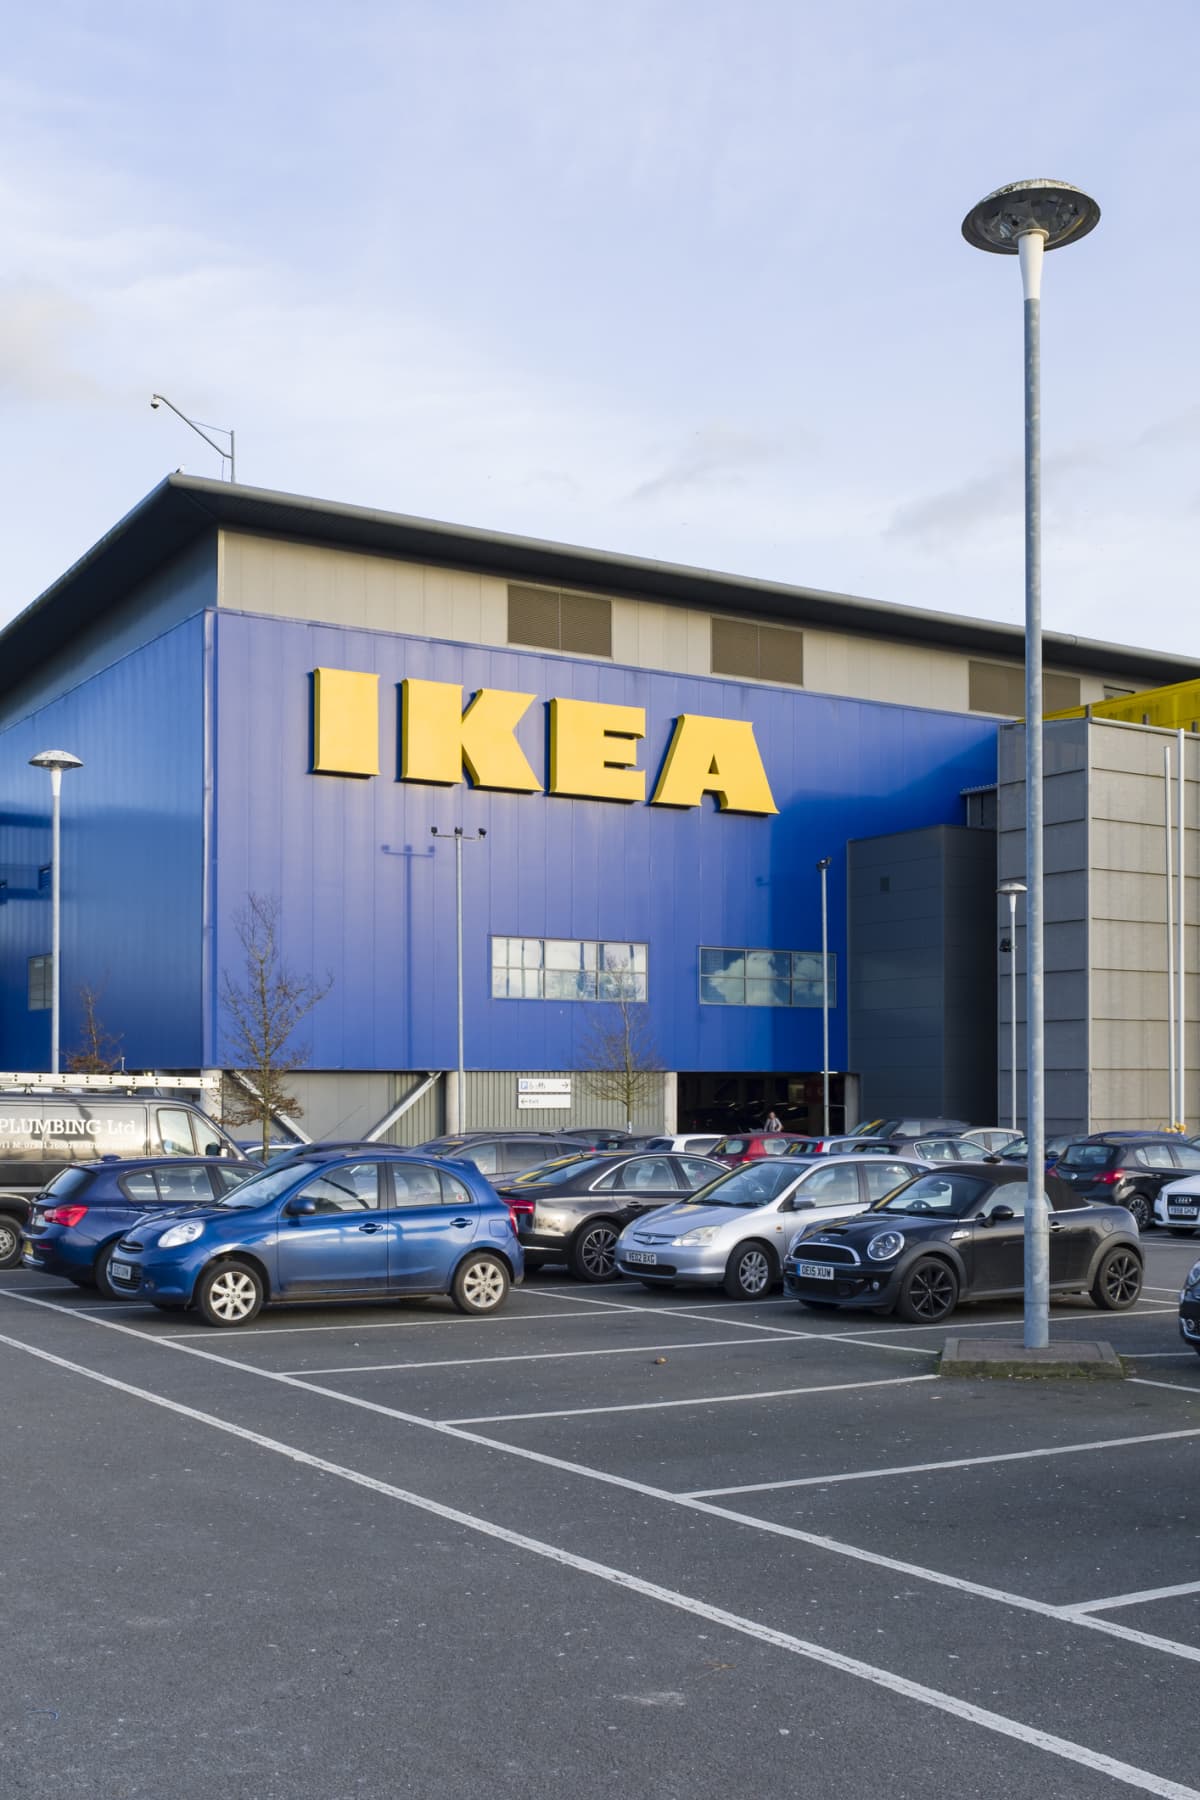 IKEA store in the UK with cars out front